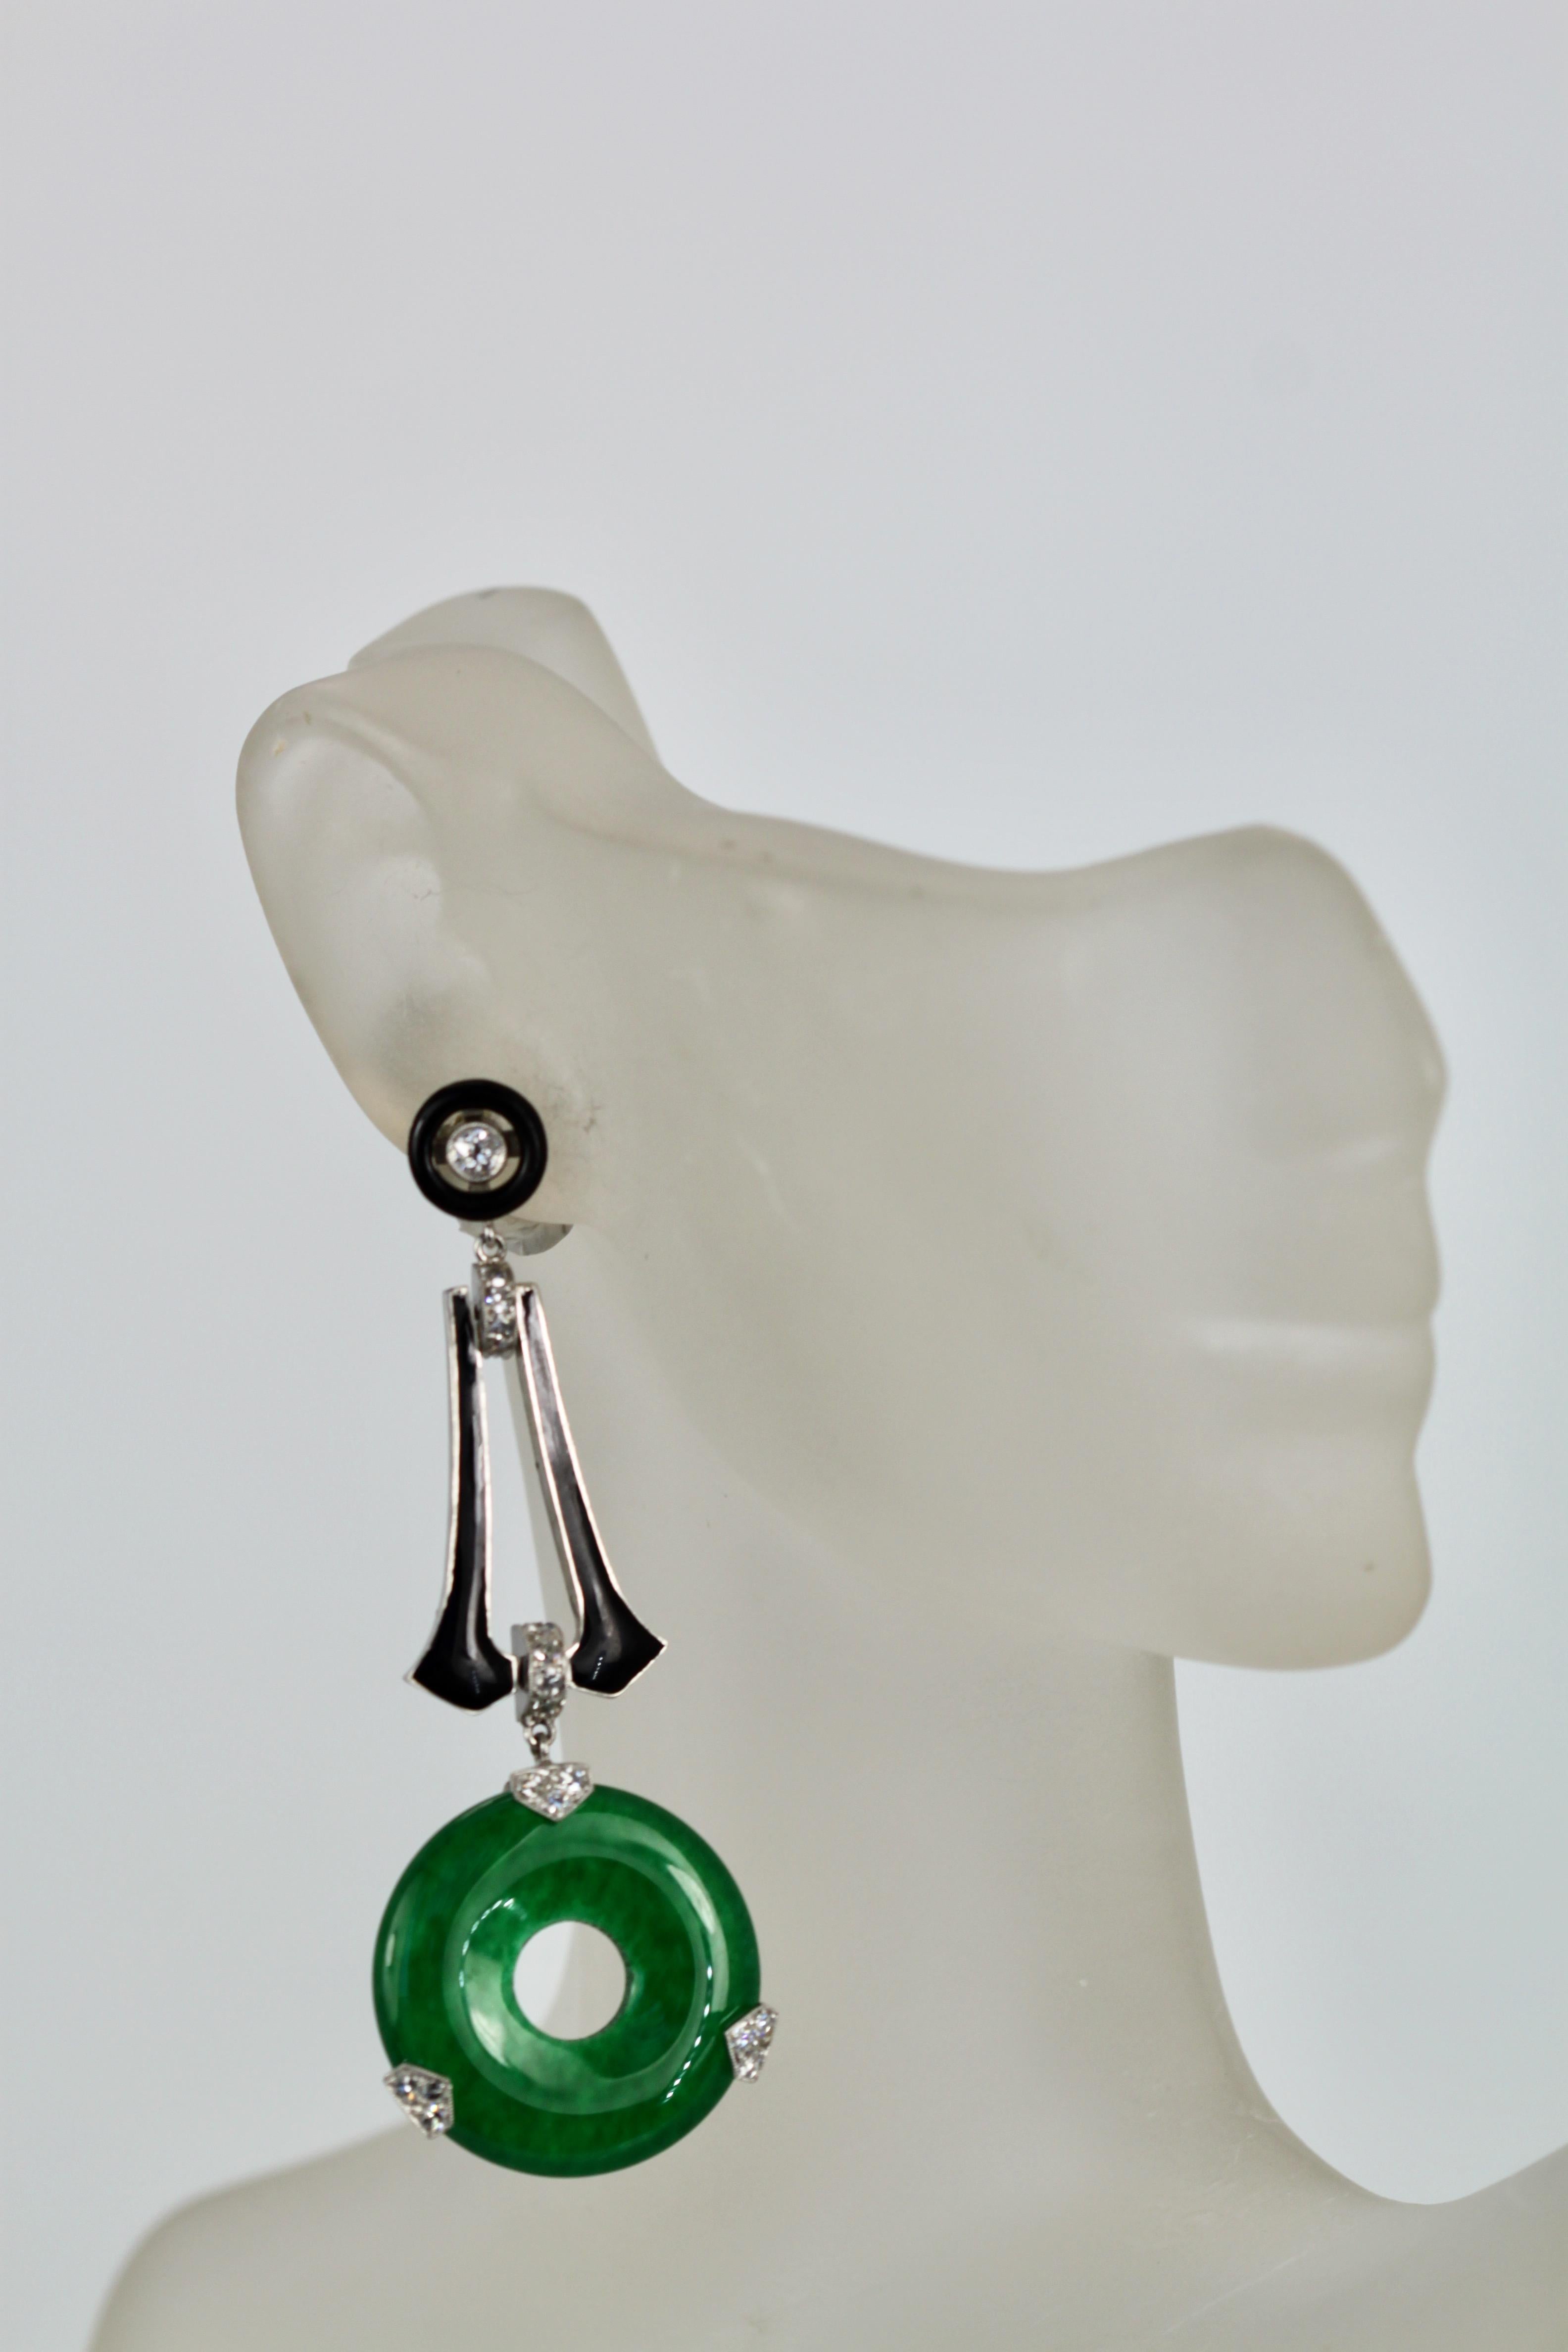 These beautiful Jade Black Enamel Diamond earrings are set with black enamel and Diamond accents.  These earrings are 2 1/2